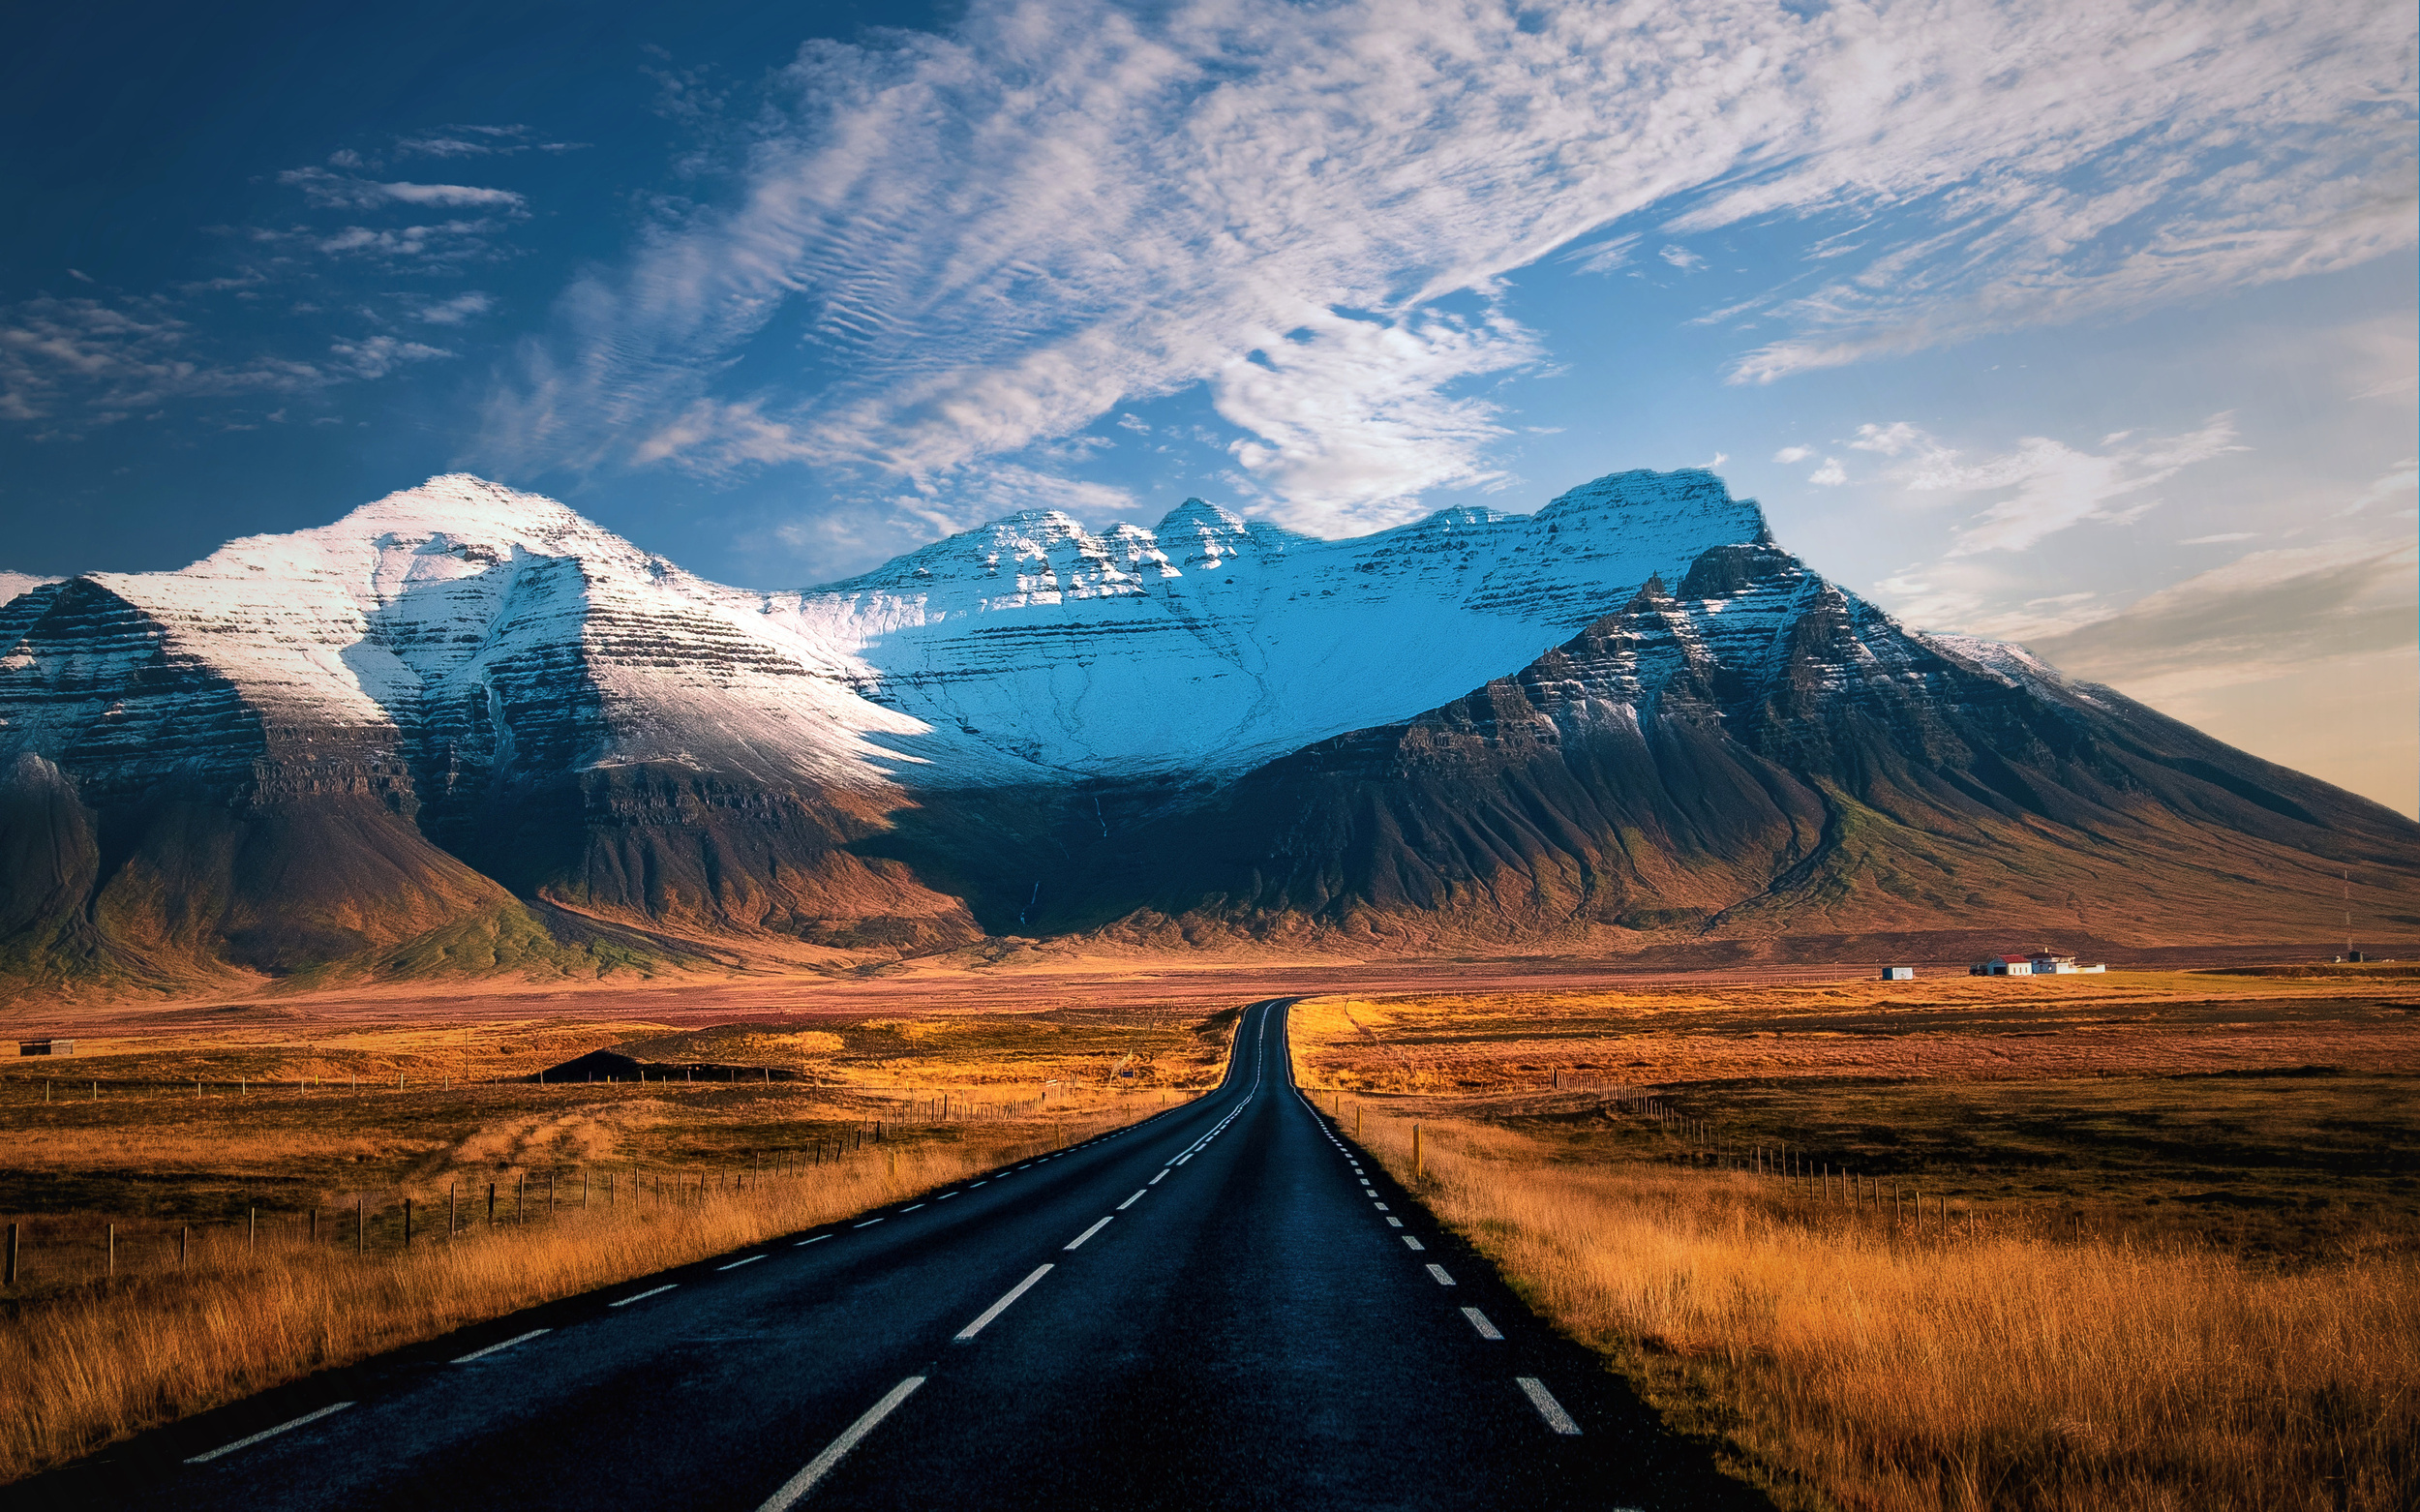 <p>The Ring Road is a well-trodden (or, in this case, driven) tourist route for a reason. You’ll hit up all the best sites in the country: cascading waterfalls, glacier beaches, and volcanic landscapes. Just be prepared to share the roads with lots of other tourists!</p><p><a href='https://www.msn.com/en-us/community/channel/vid-cj9pqbr0vn9in2b6ddcd8sfgpfq6x6utp44fssrv6mc2gtybw0us'>Follow us on MSN to see more of our exclusive lifestyle content.</a></p>